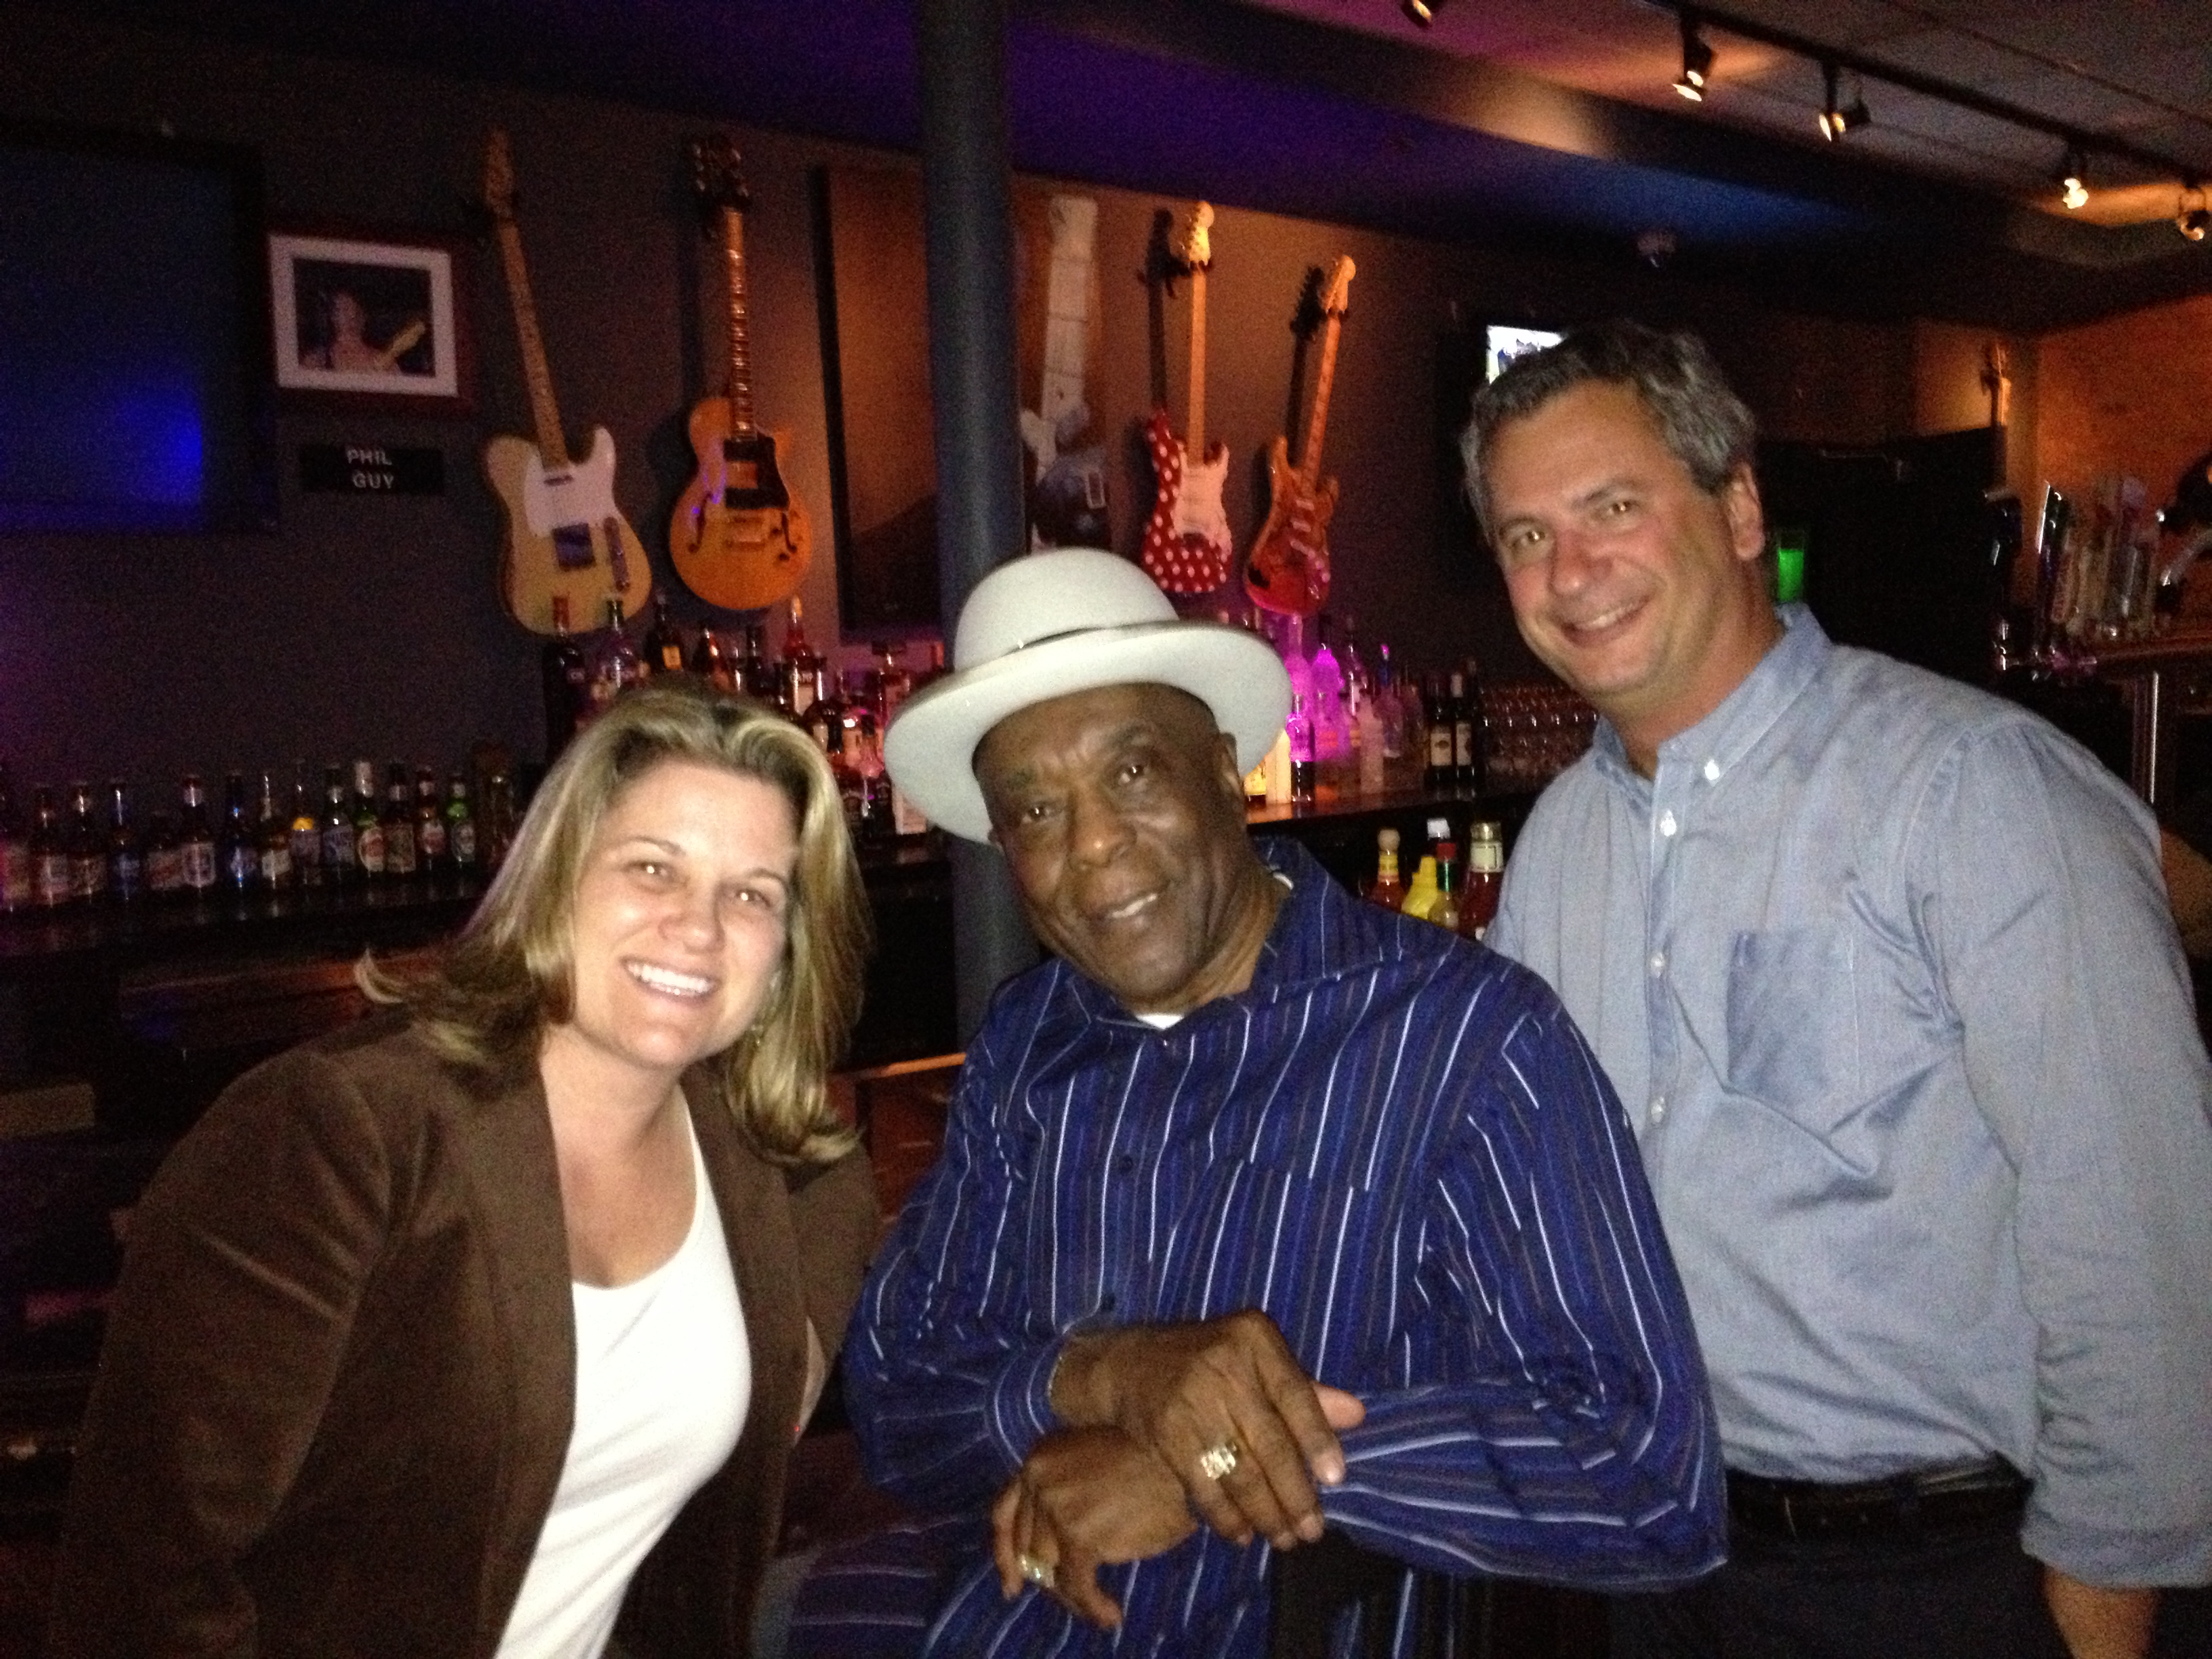 With fellow Lean Practitioner and friend Danette Conley at Buddy Guy